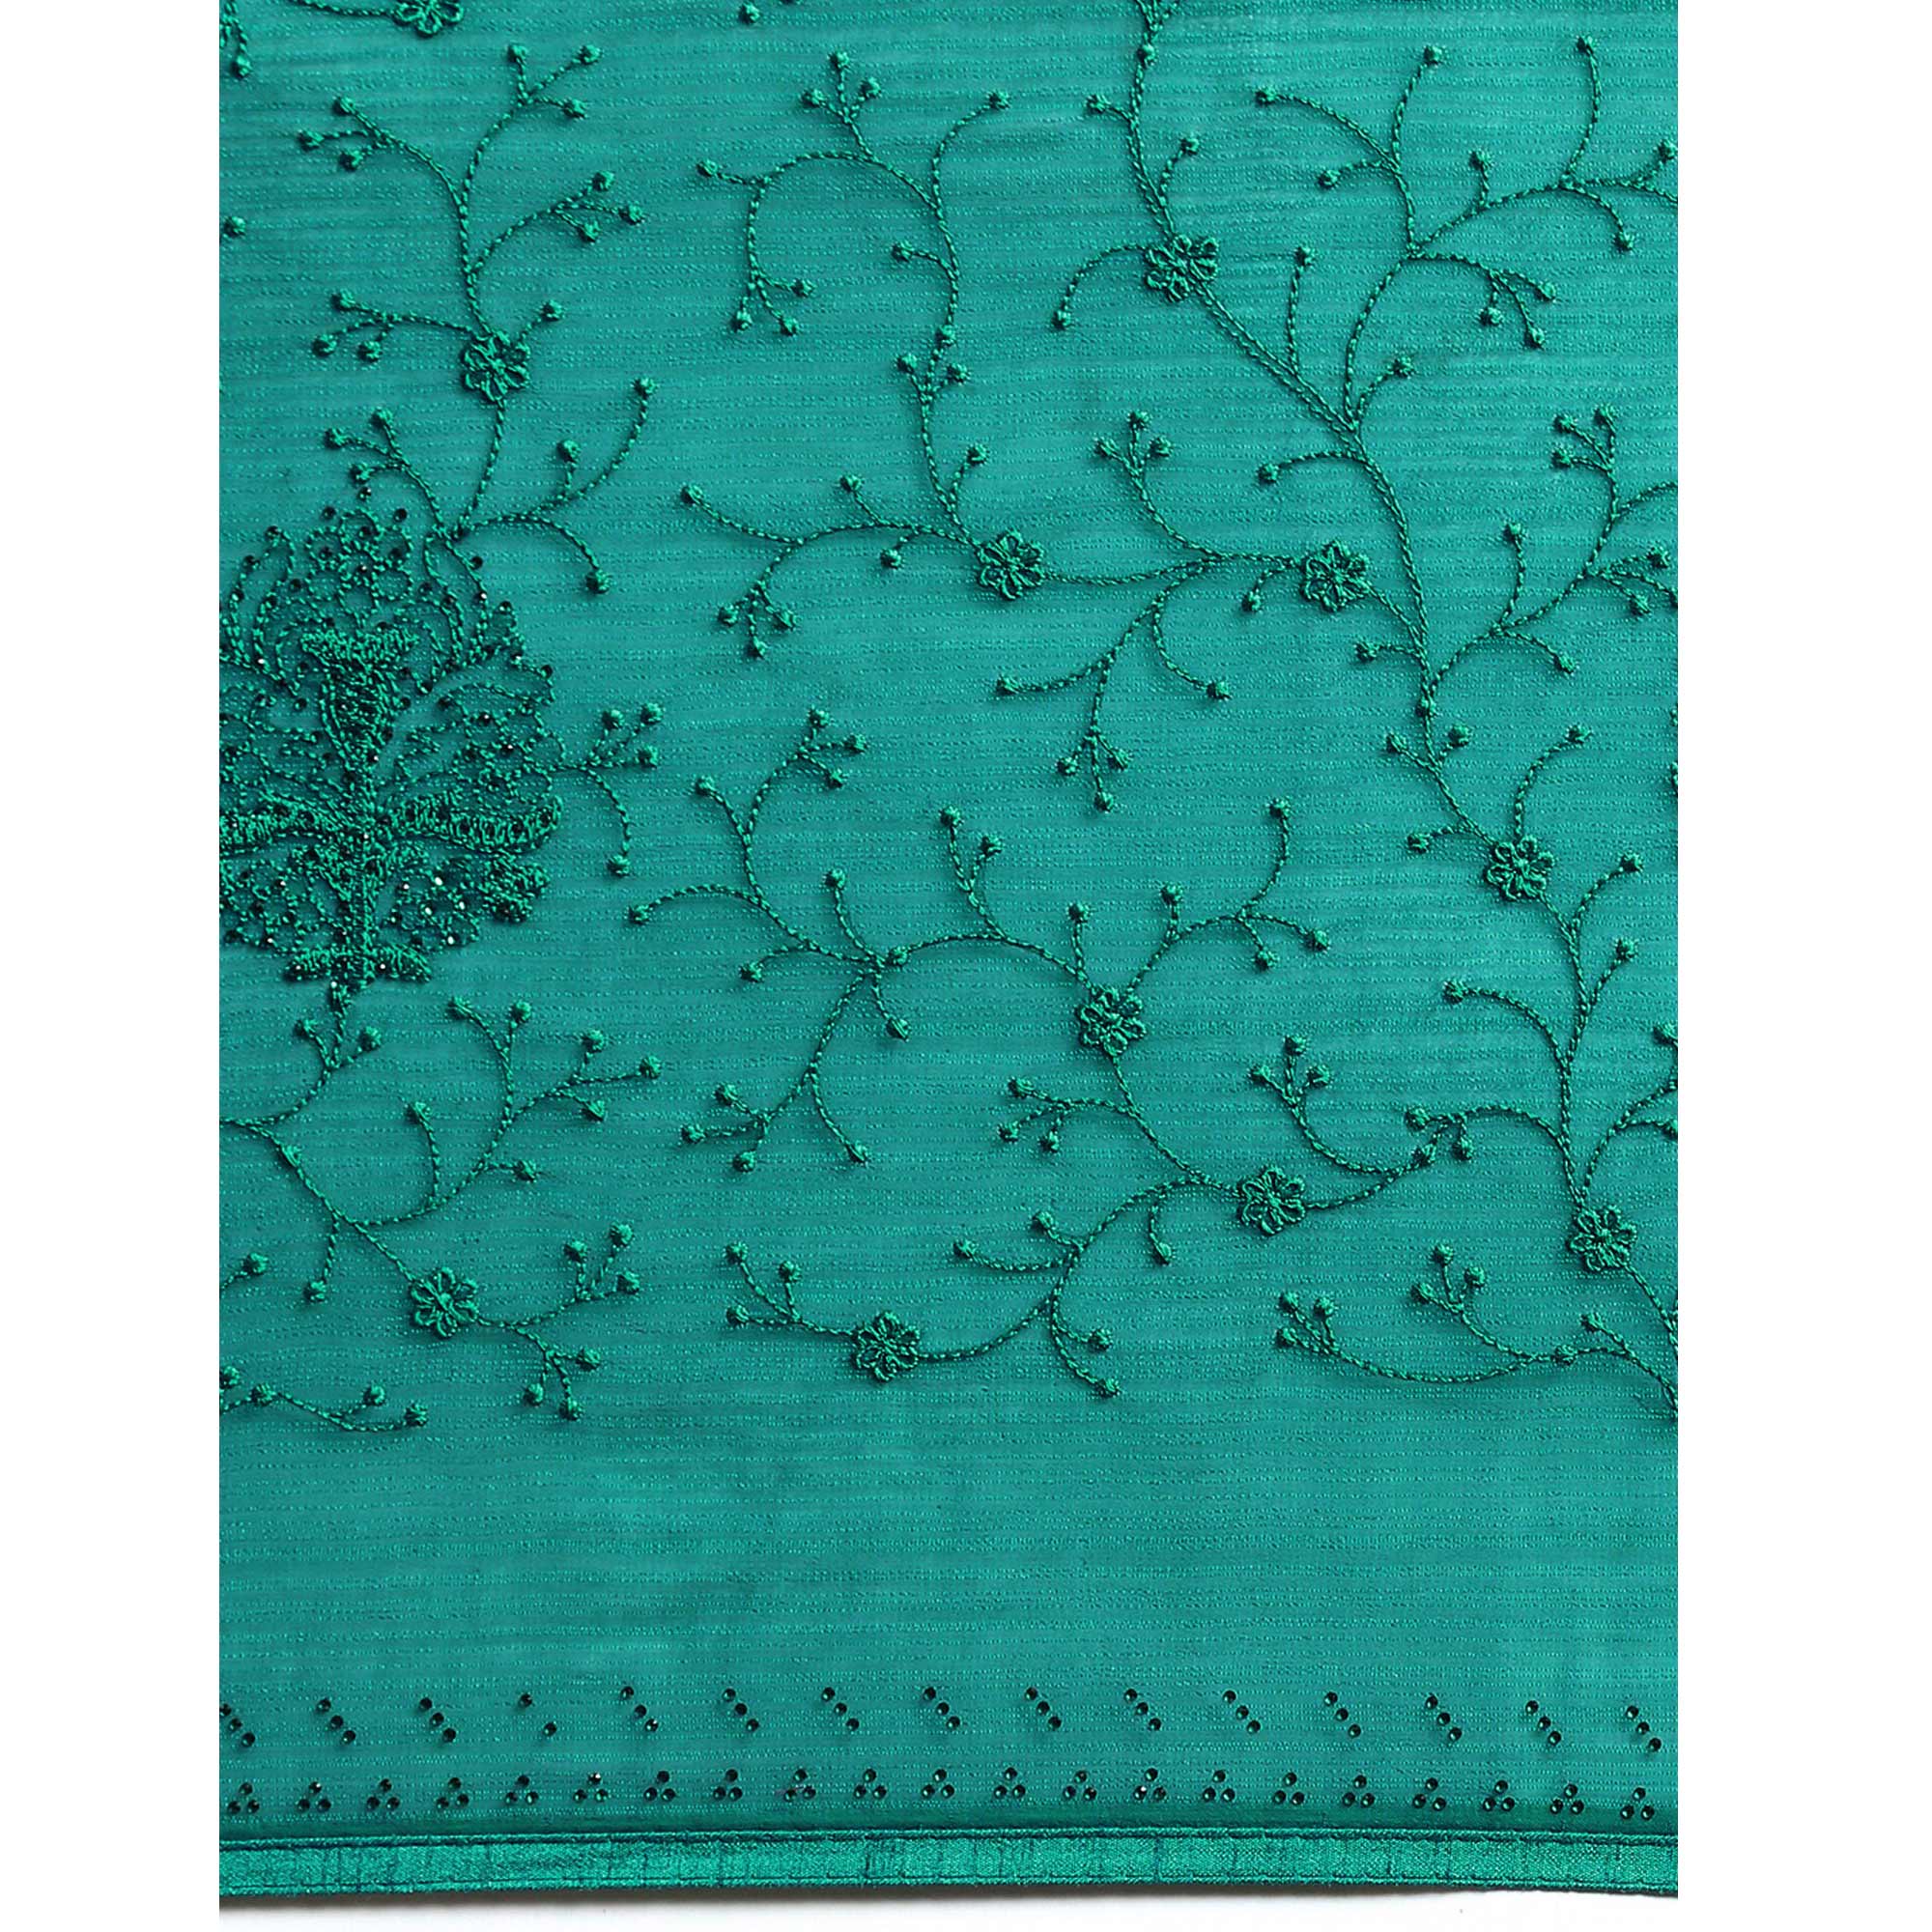 Turquoise Green Floral Embroidered Zomato Silk Saree